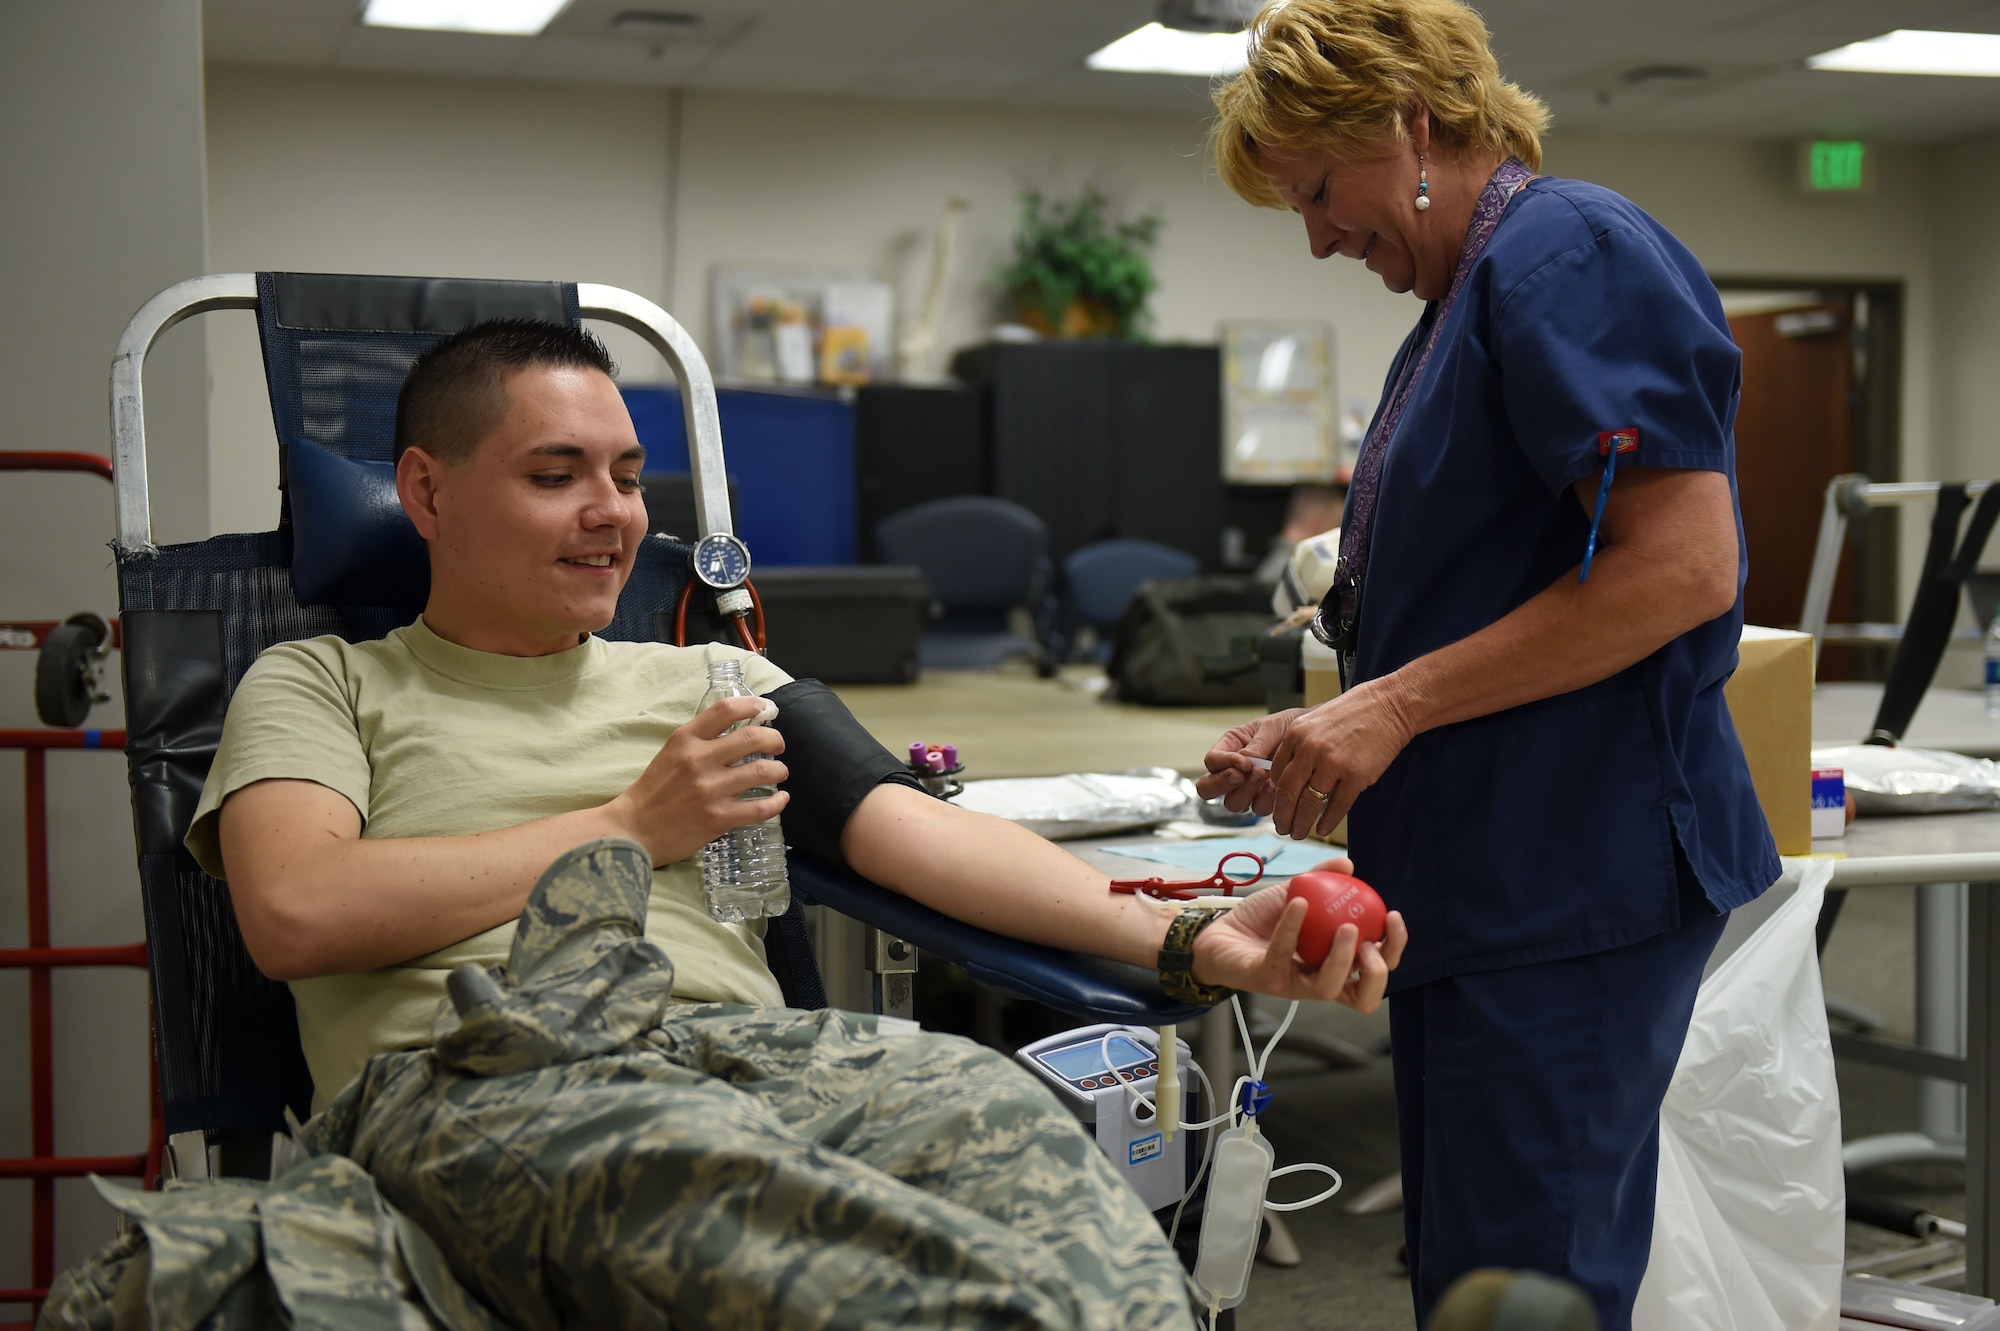 Staff Sgt. Isaac R. Salazar, 460th Space Wing plans manager, gets his blood drawn by Joyce Kissle, Bonfils Blood Bank phlebotomist, during the blood drive June 2, 2015, at the Health and Wellness Center on Buckley Air Force Base, Colo. The blood drive was to support hospitals in the local area. (U.S. Air Force photo by Airman 1st Class Emily E. Amyotte/Released)